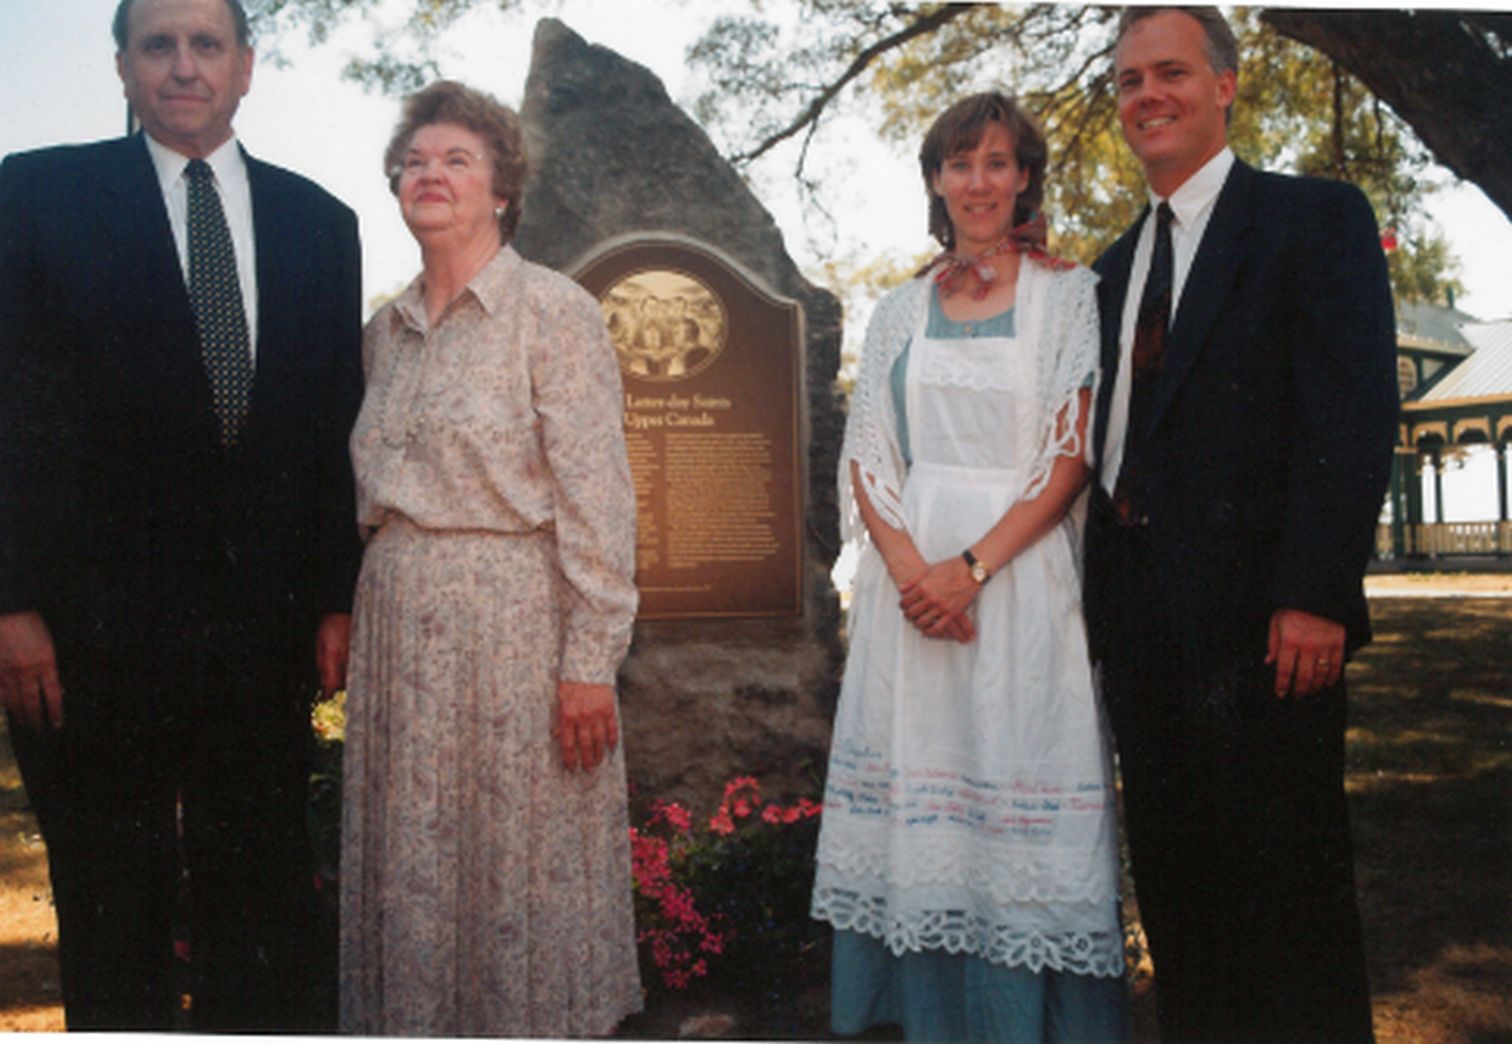 Thomas S. Monson and his wife Frances at the historical marker in Bath